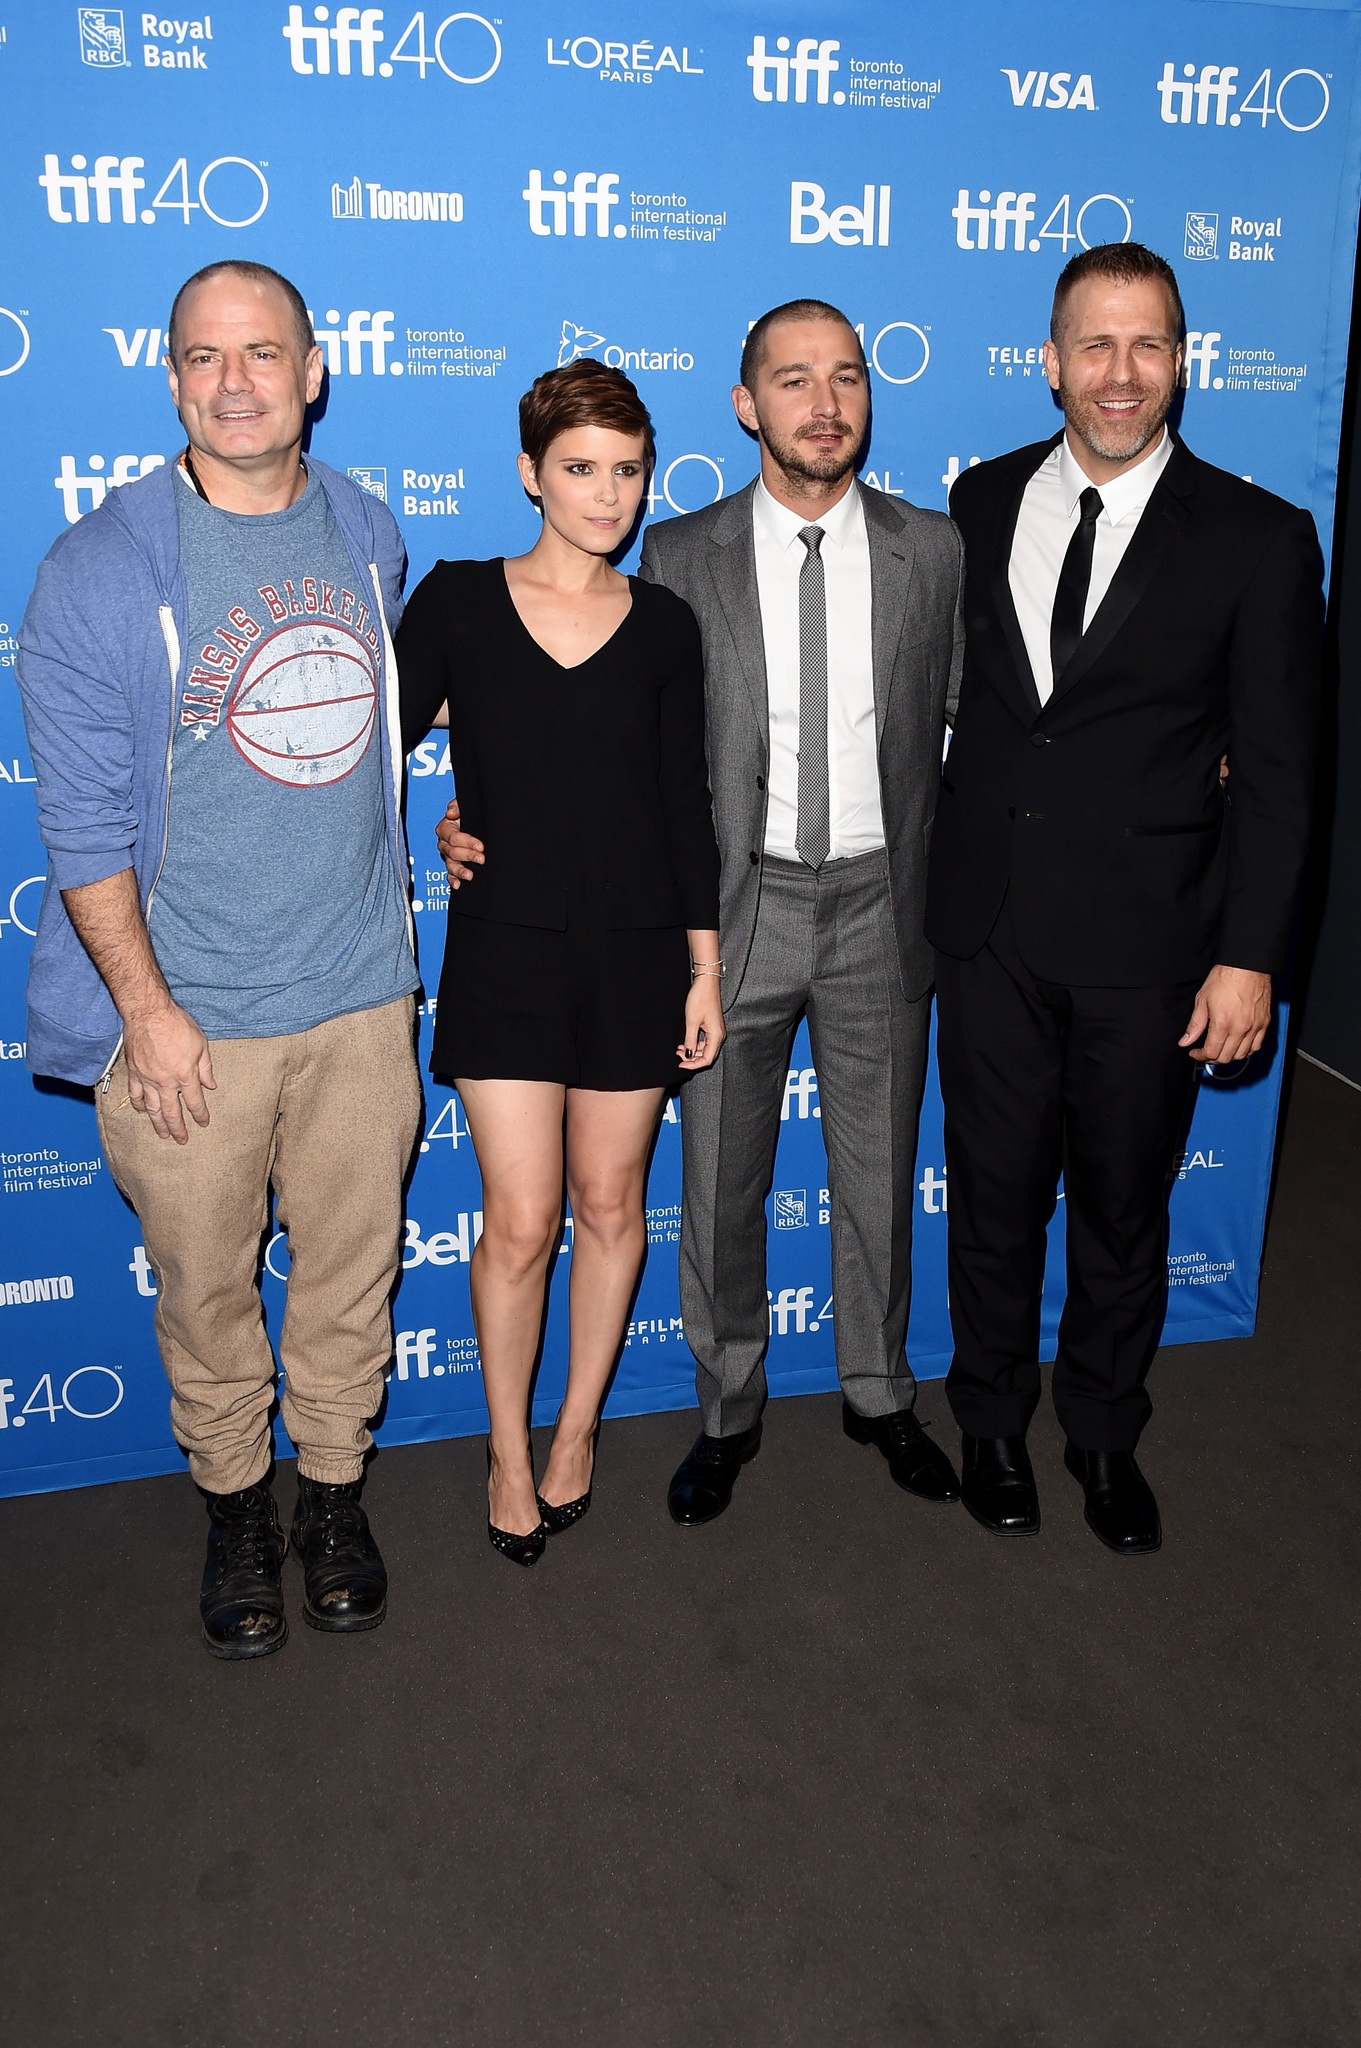 Shia LaBeouf, Kate Mara and Dito Montiel at event of Man Down (2015)